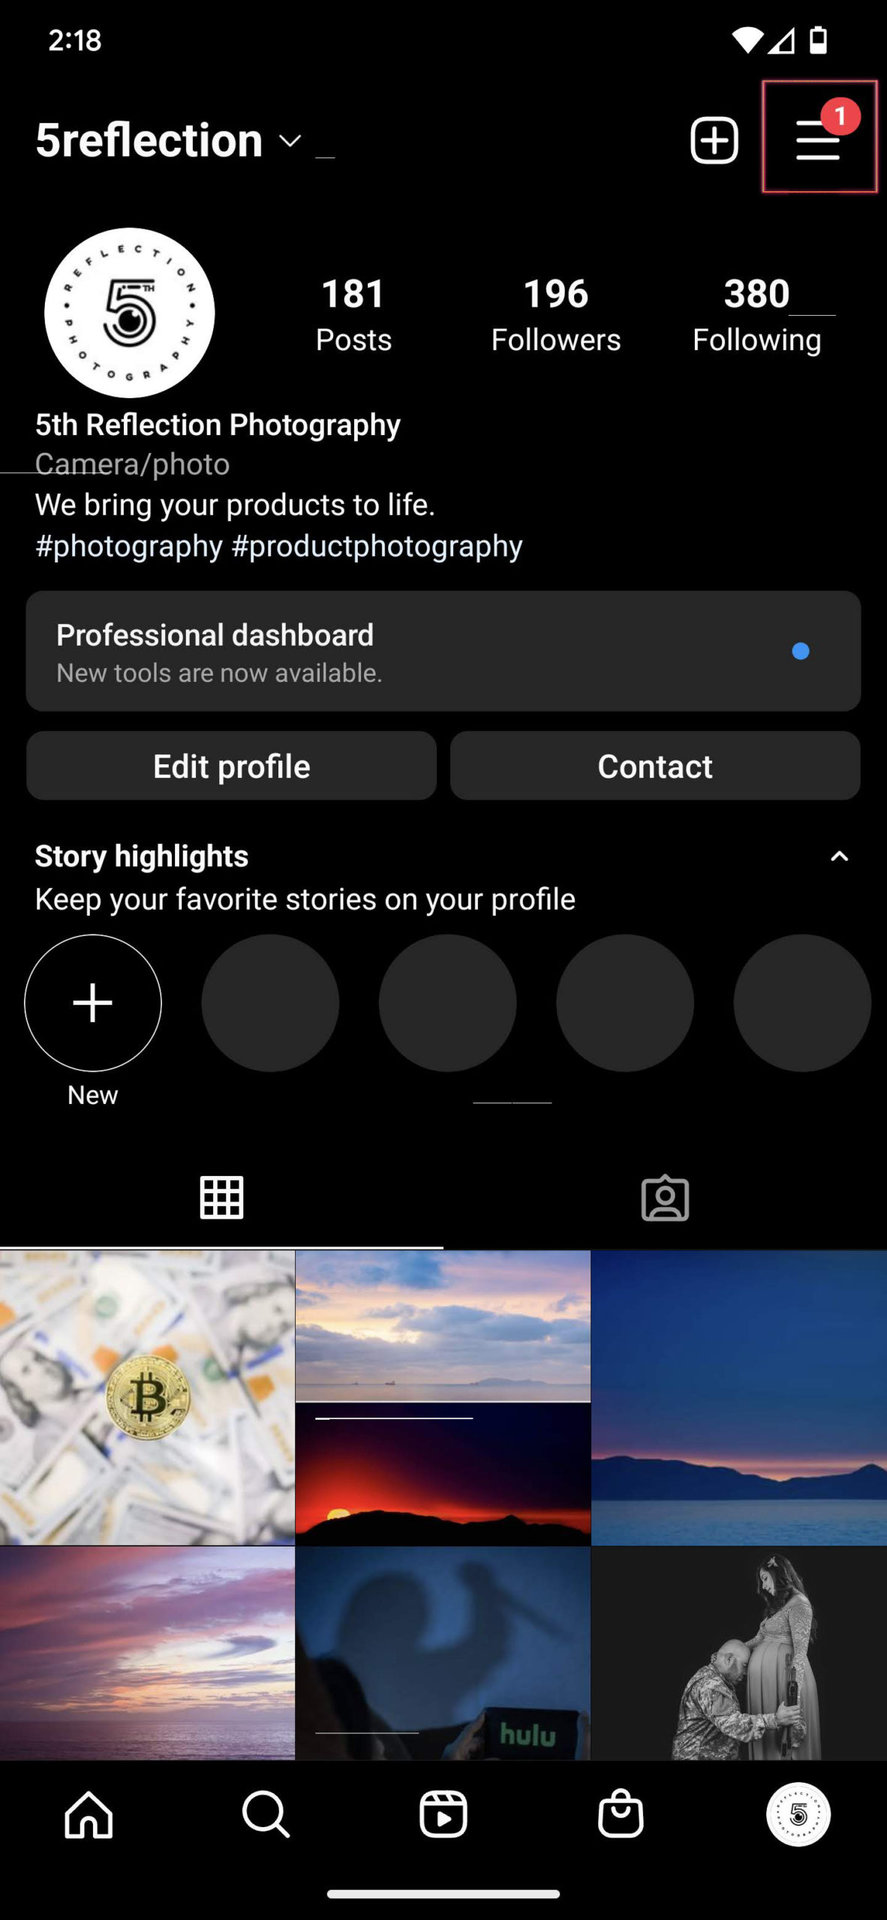 How to save images on Instagram 2